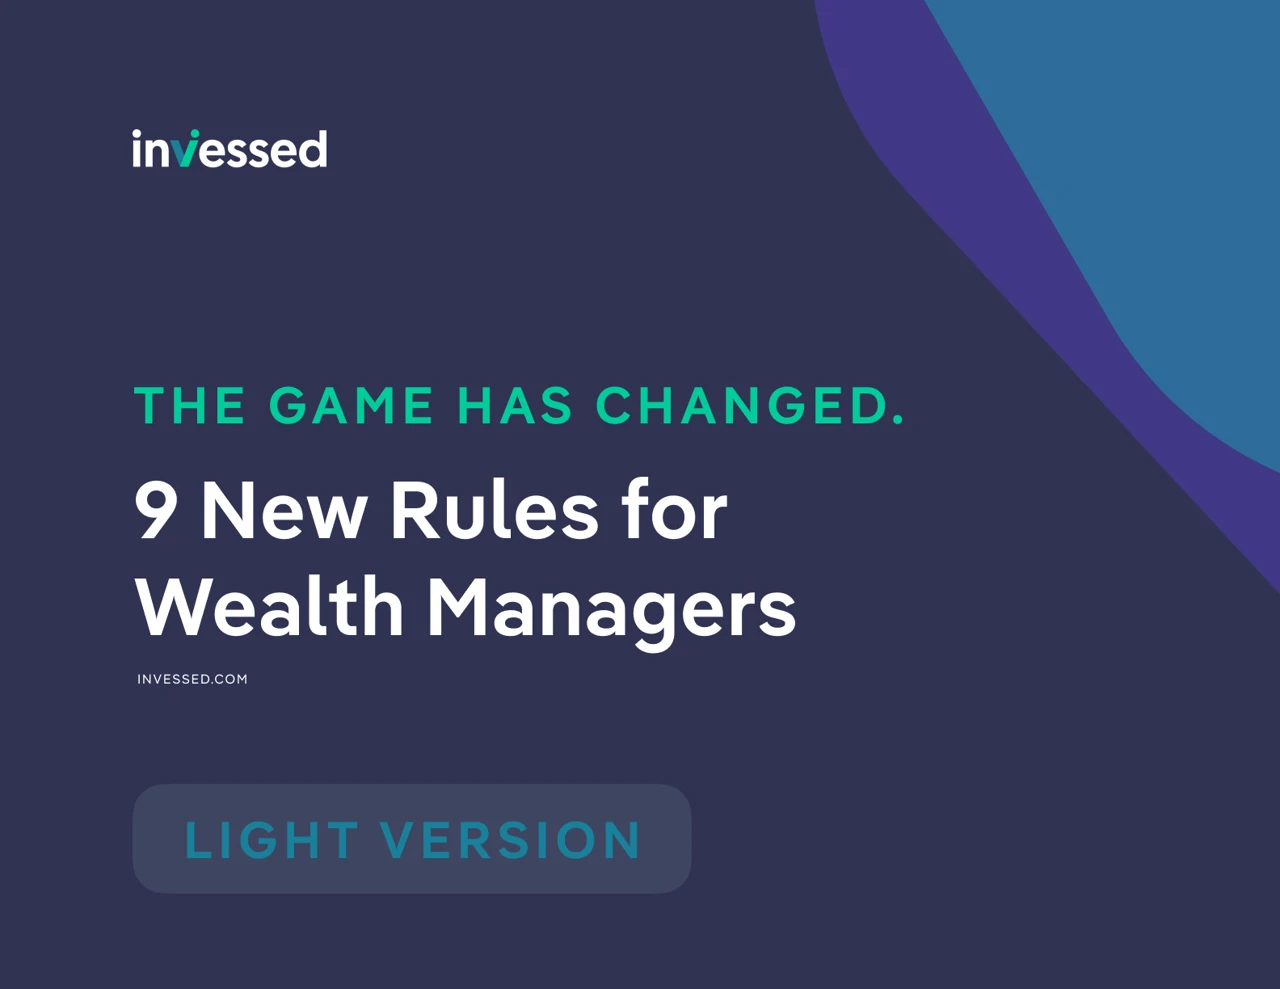 New Rules for Wealth Managers graphic